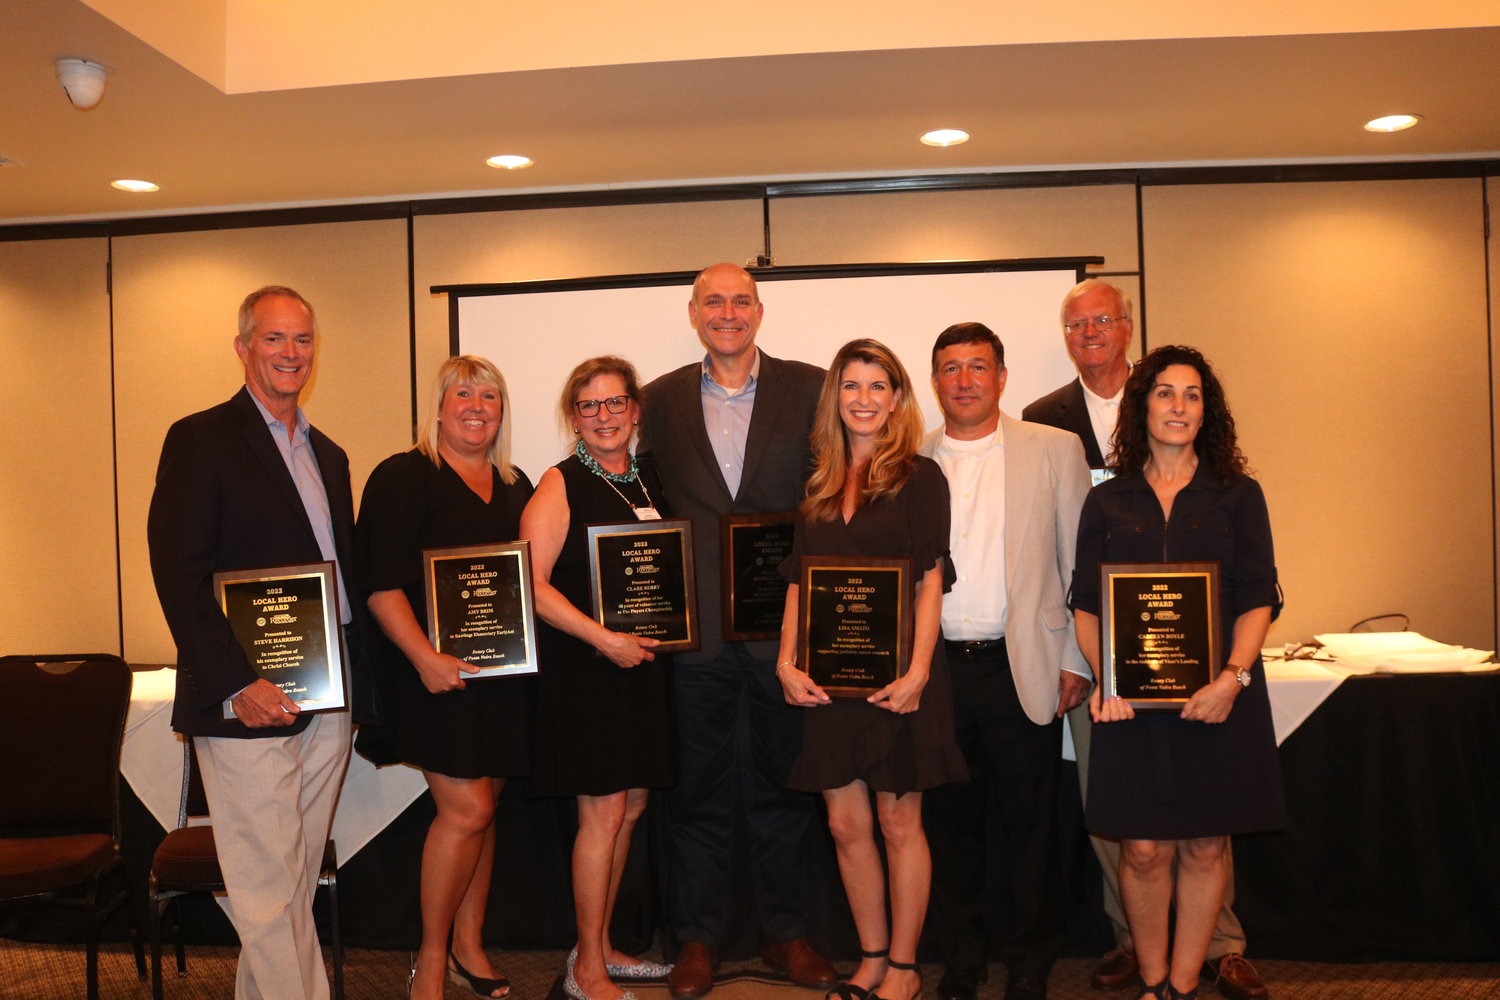 The Rotary Club of Ponte Vedra Beach and Ponte Vedra Recorder celebrated their 30th anniversary of honoring local community heroes by naming seven more as part of the 2022 class.